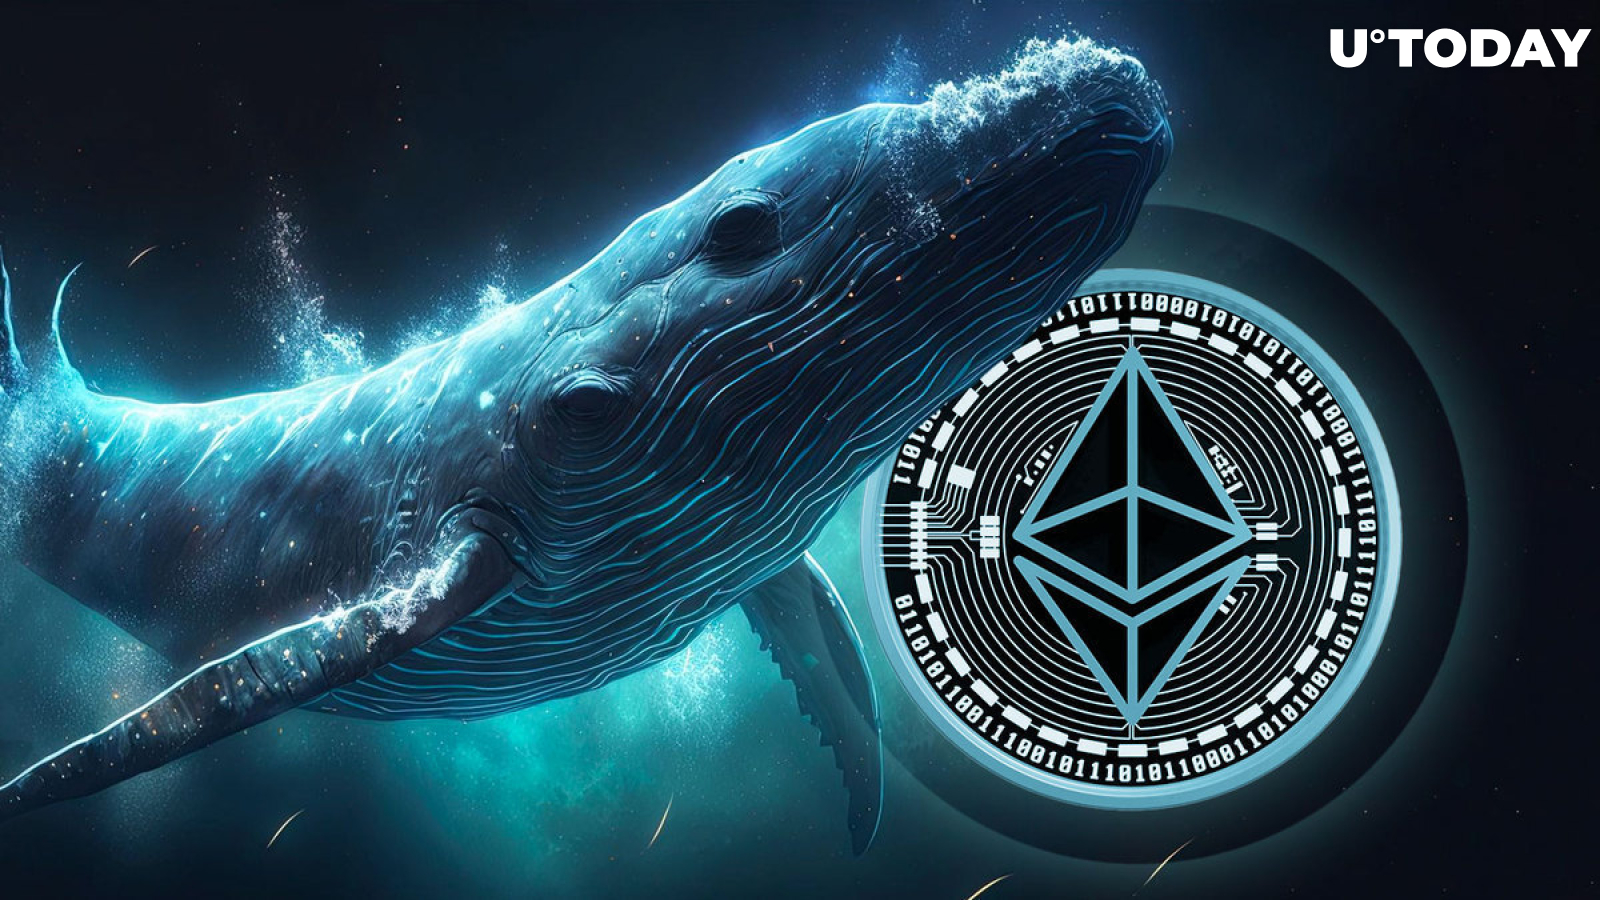 Ethereum: Mysterious Whale Sells Dormant ETH to Cash Out Millions